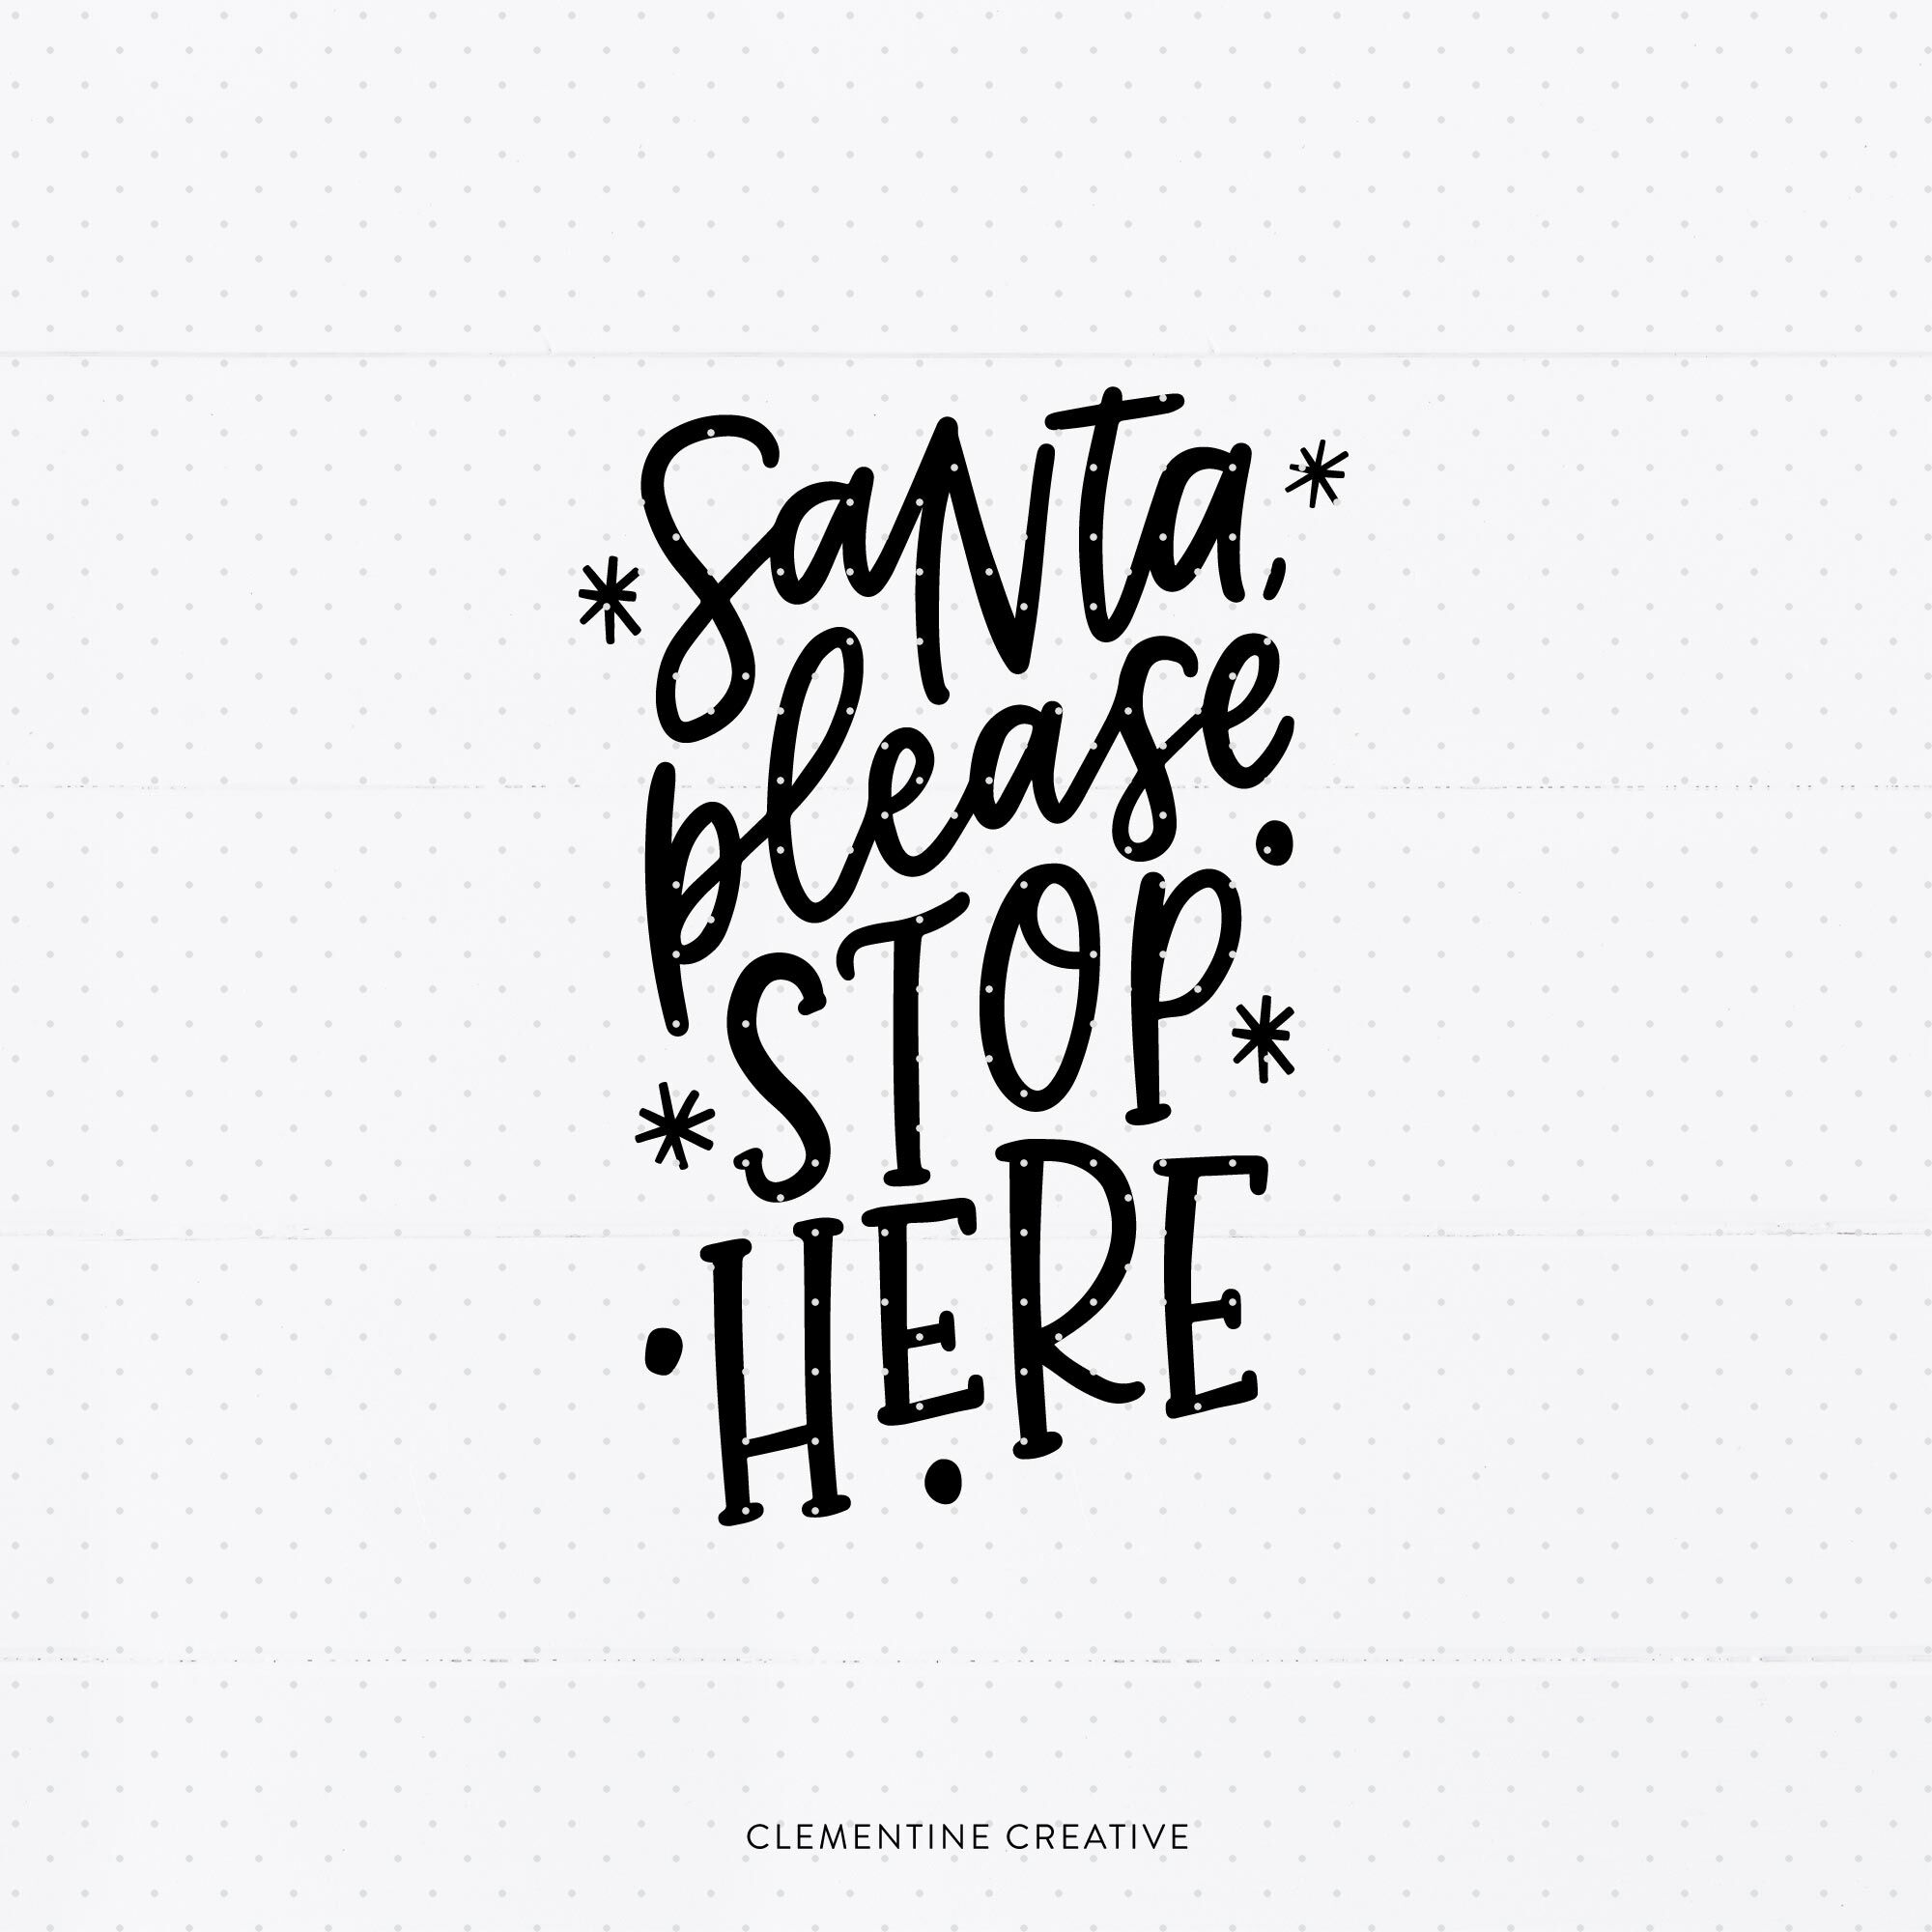 Santa Please Stop Here Svg Cut File For Cricut And Silhouette Christ By Clementine Creative Thehungryjpeg Com